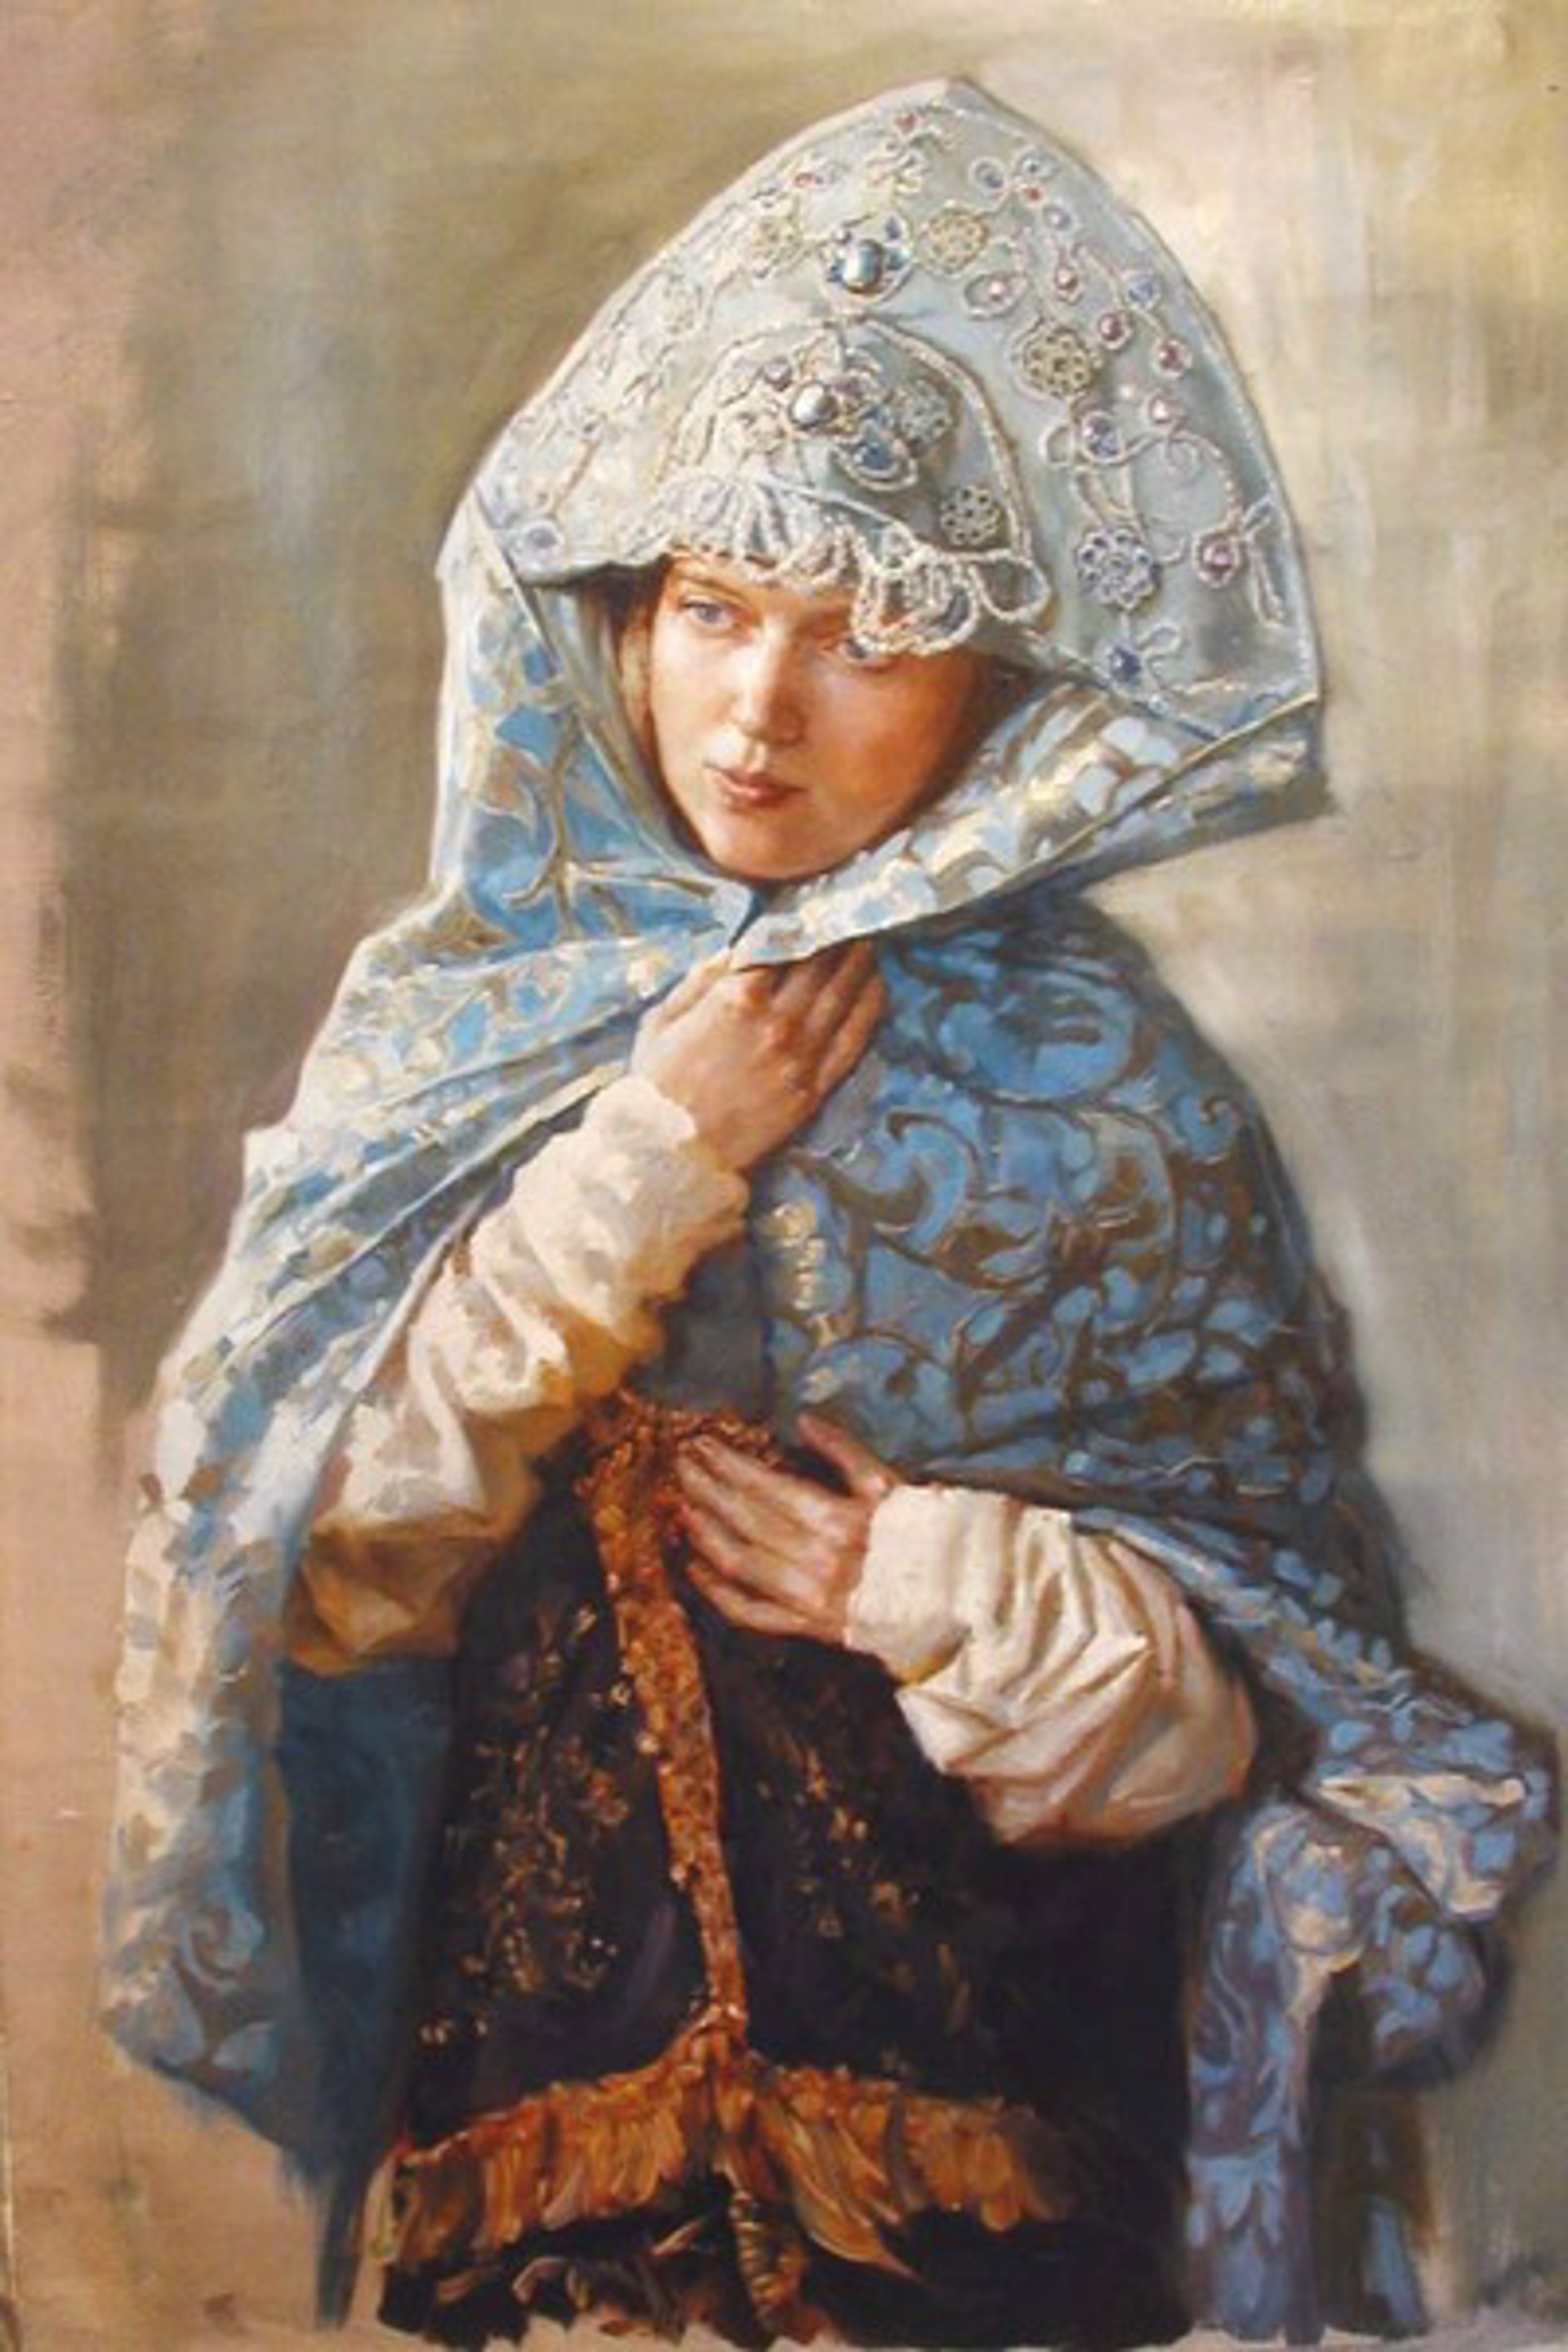 In Old Russian Costume by Vyacheslav Morgun